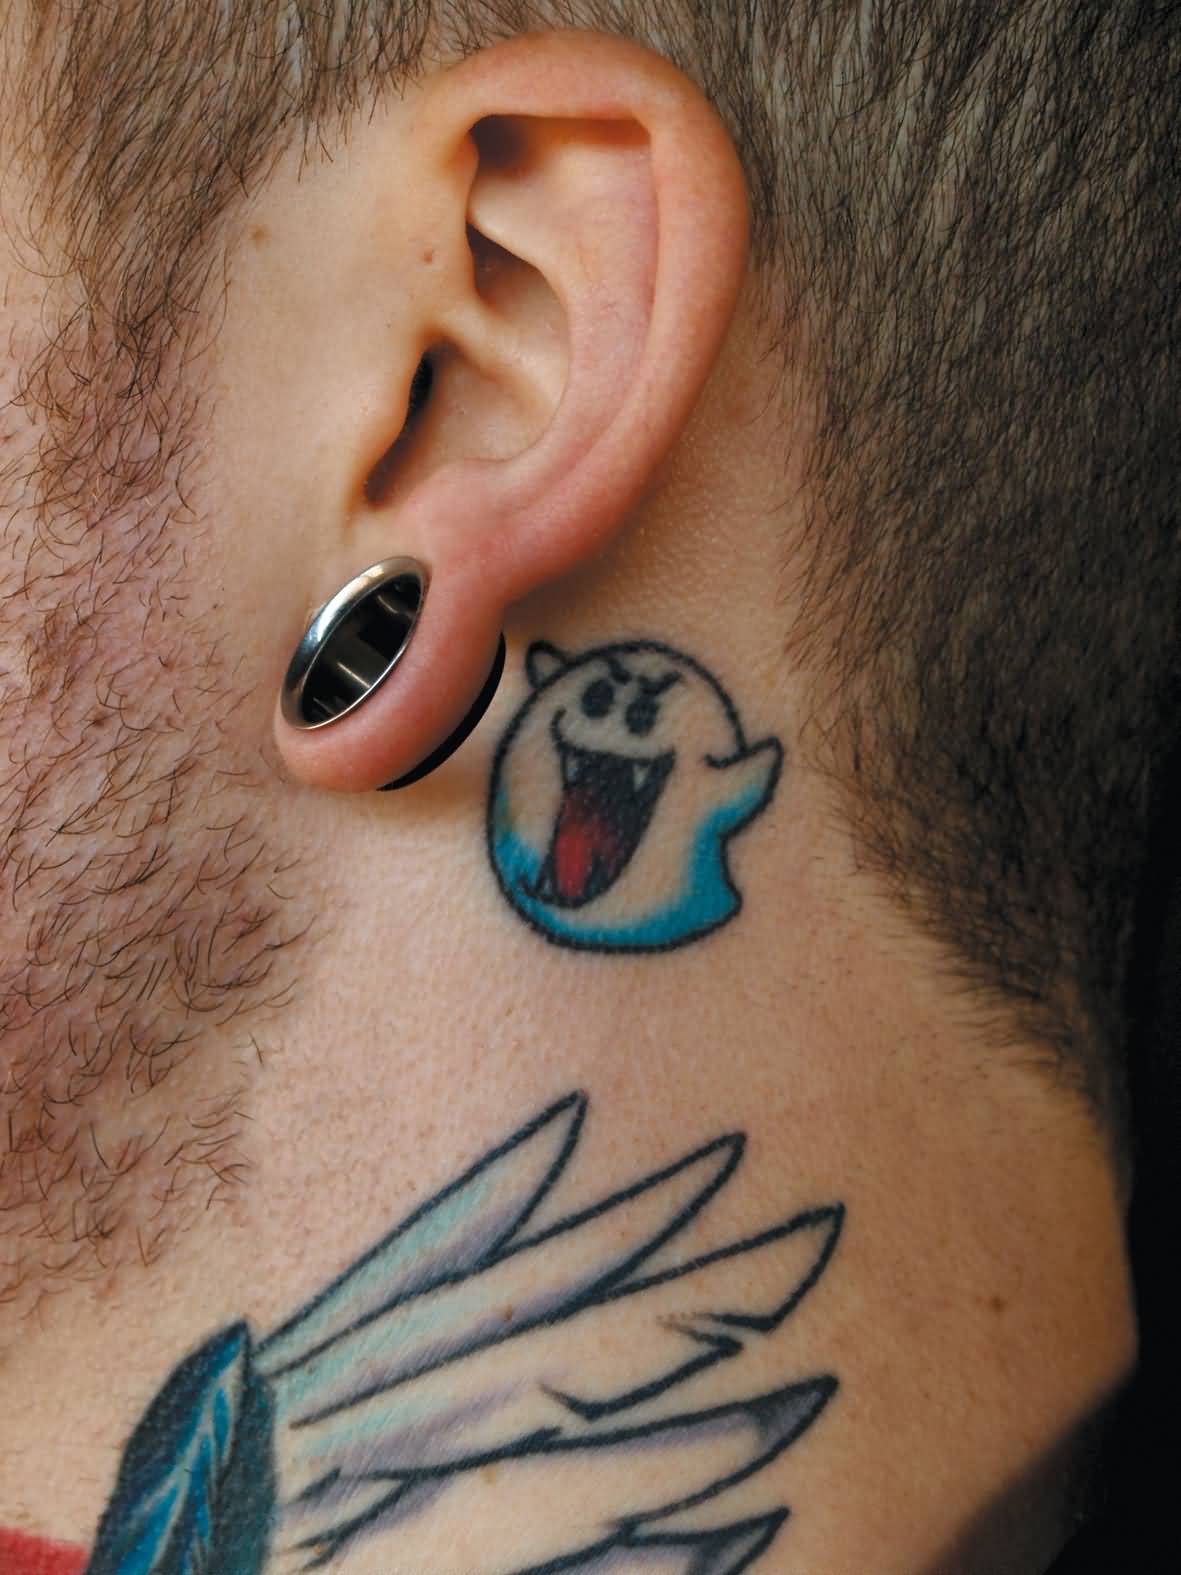 Tiny Boo From Super Mario Tattoo On Behind Ear